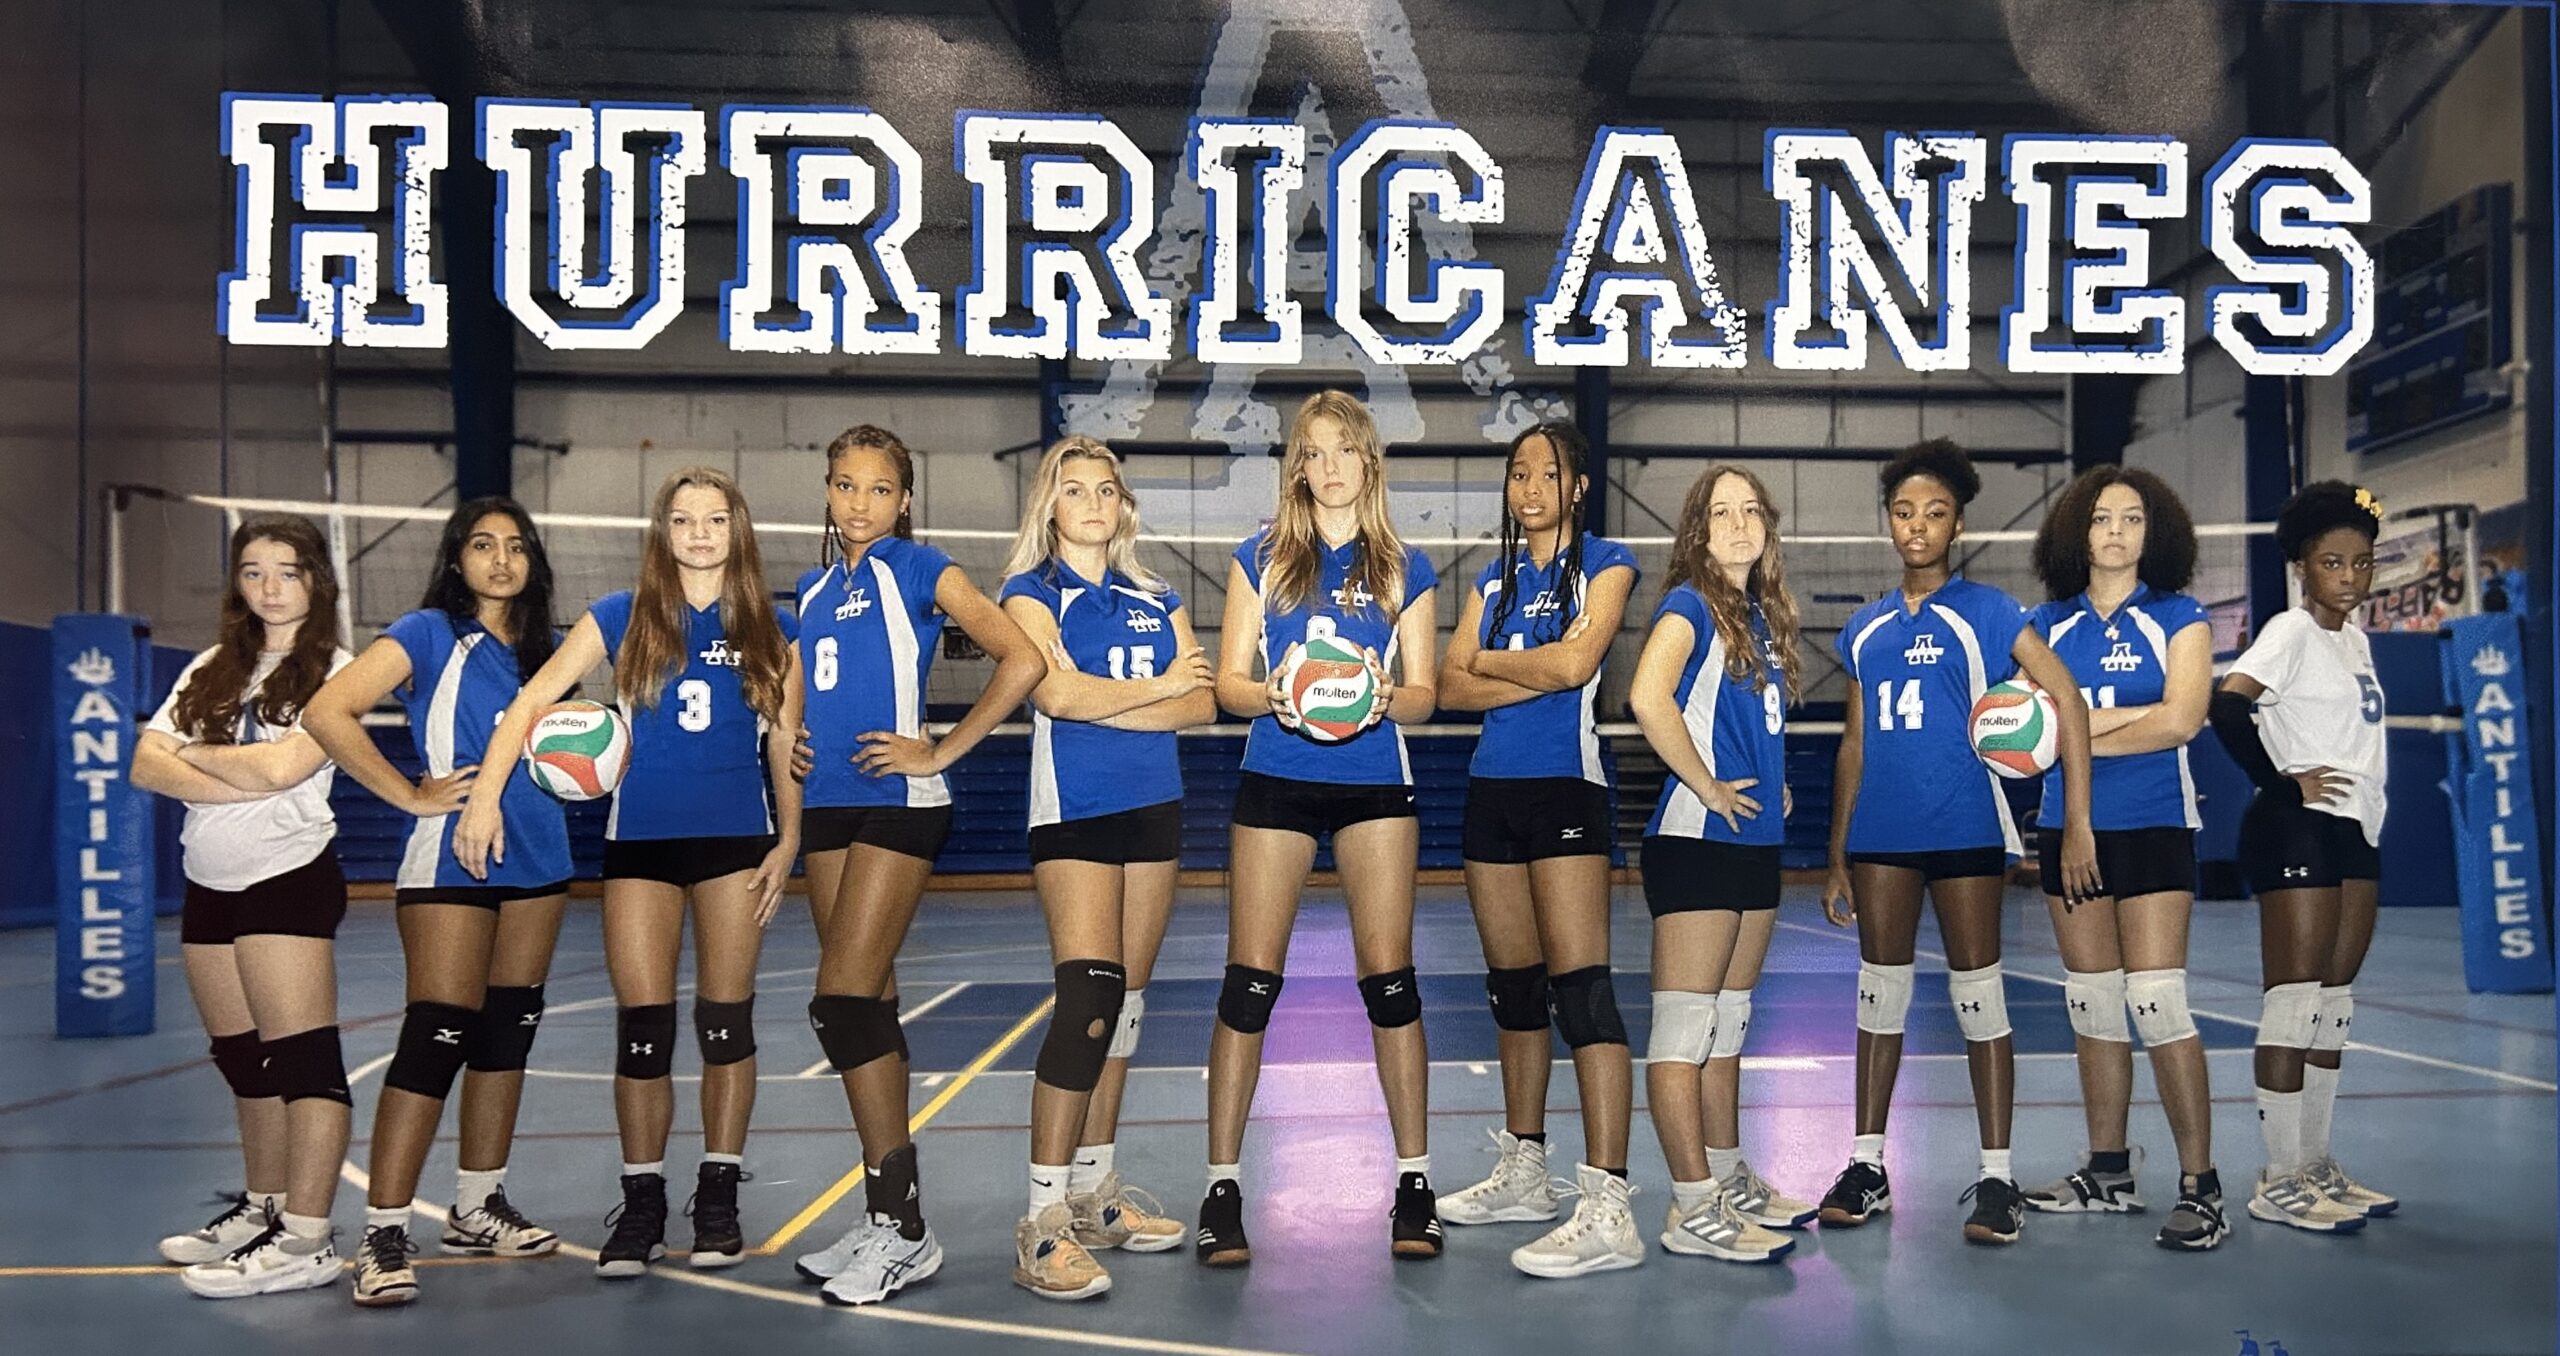 1.The Antilles School Hurricanes varsity girls volleyball team picture. (Photo by Kelly Uszenski)